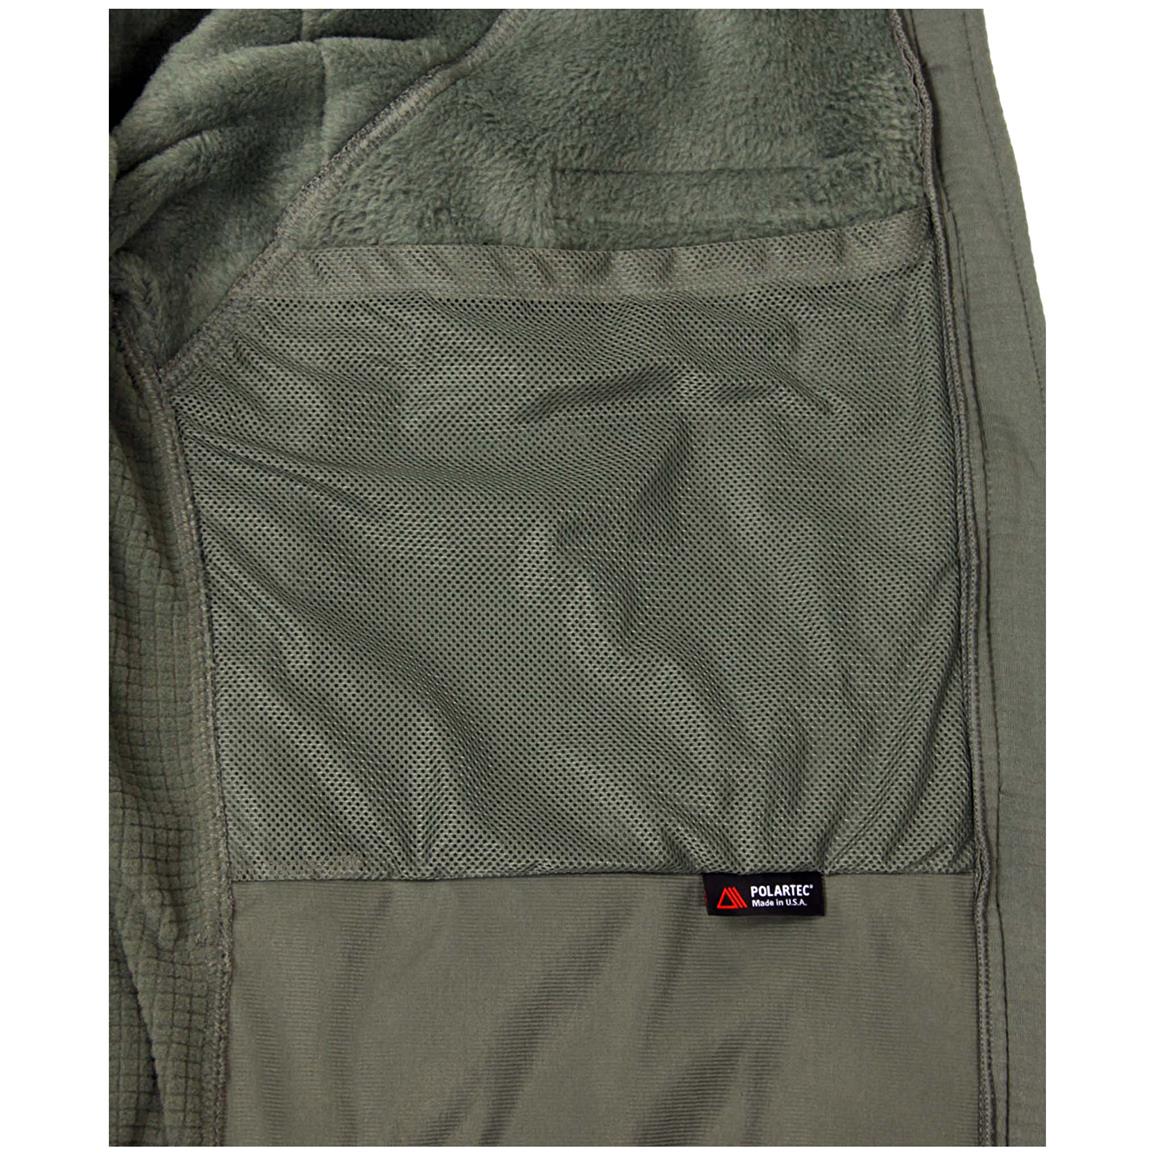 New British Military Surplus Quilted Liner Set, Olive Drab - 216428 ...